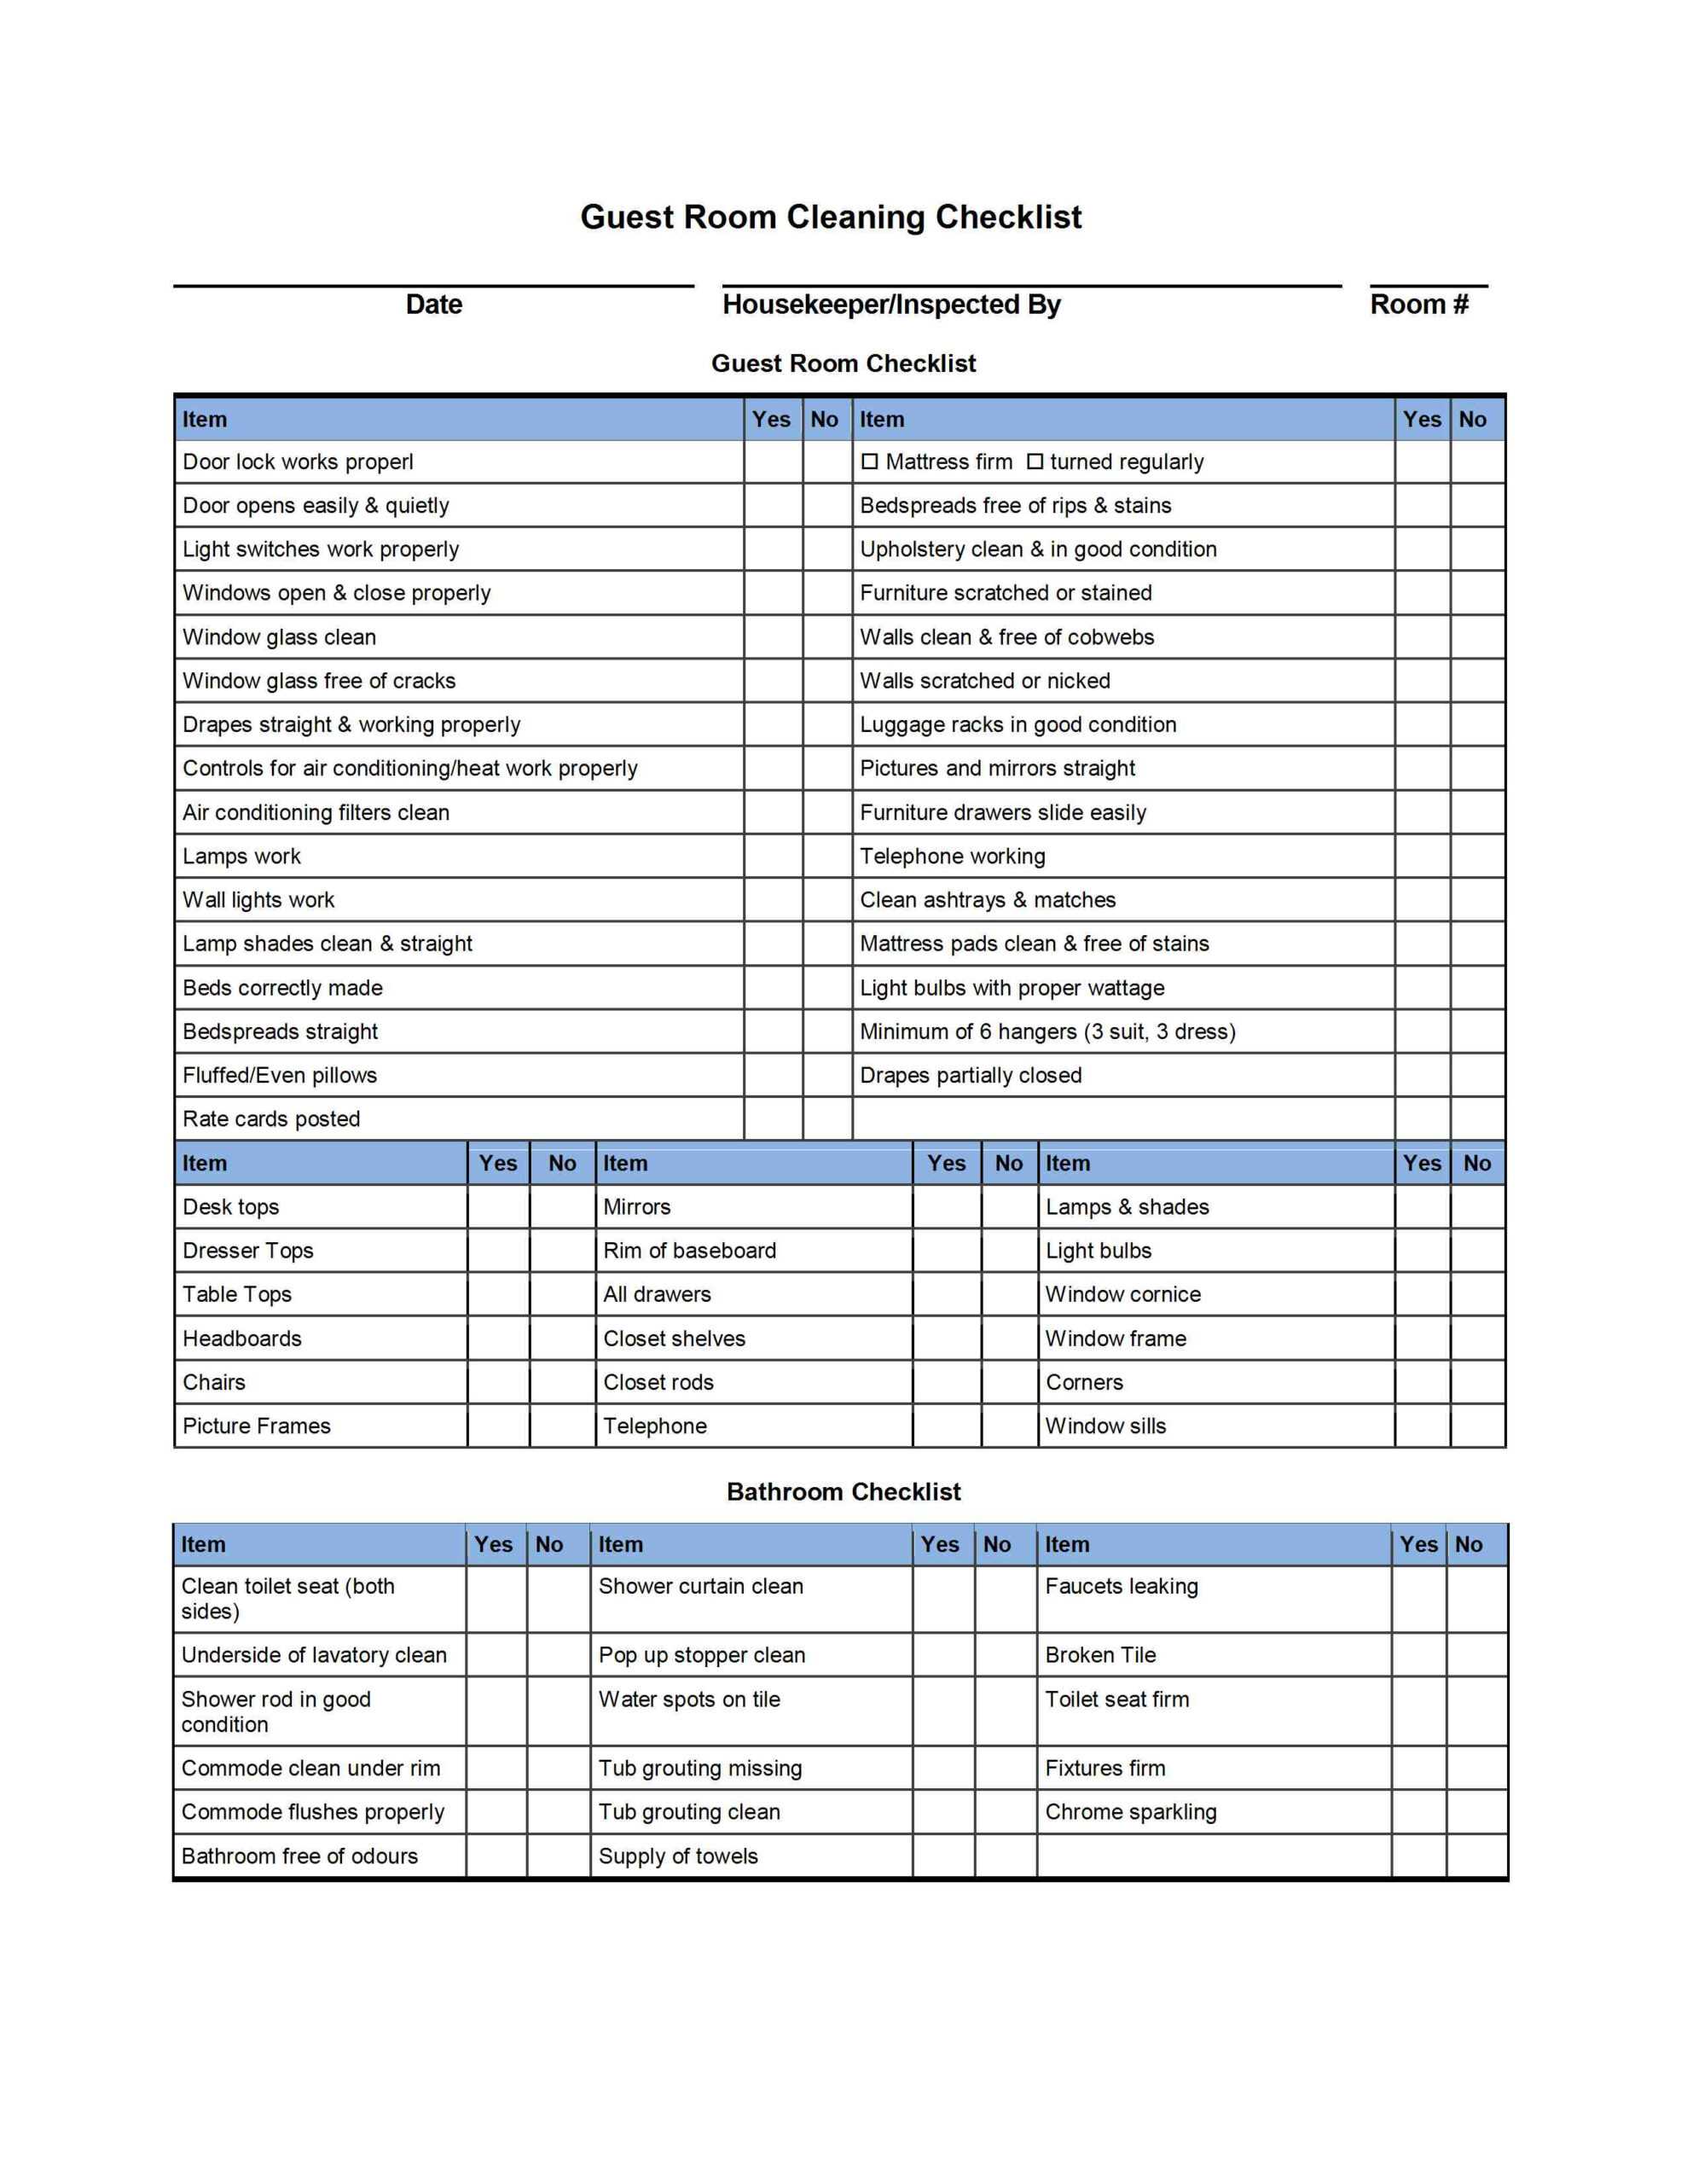 Guest Room Cleaning Checklist Template With Table Checklist With Cleaning Report Template